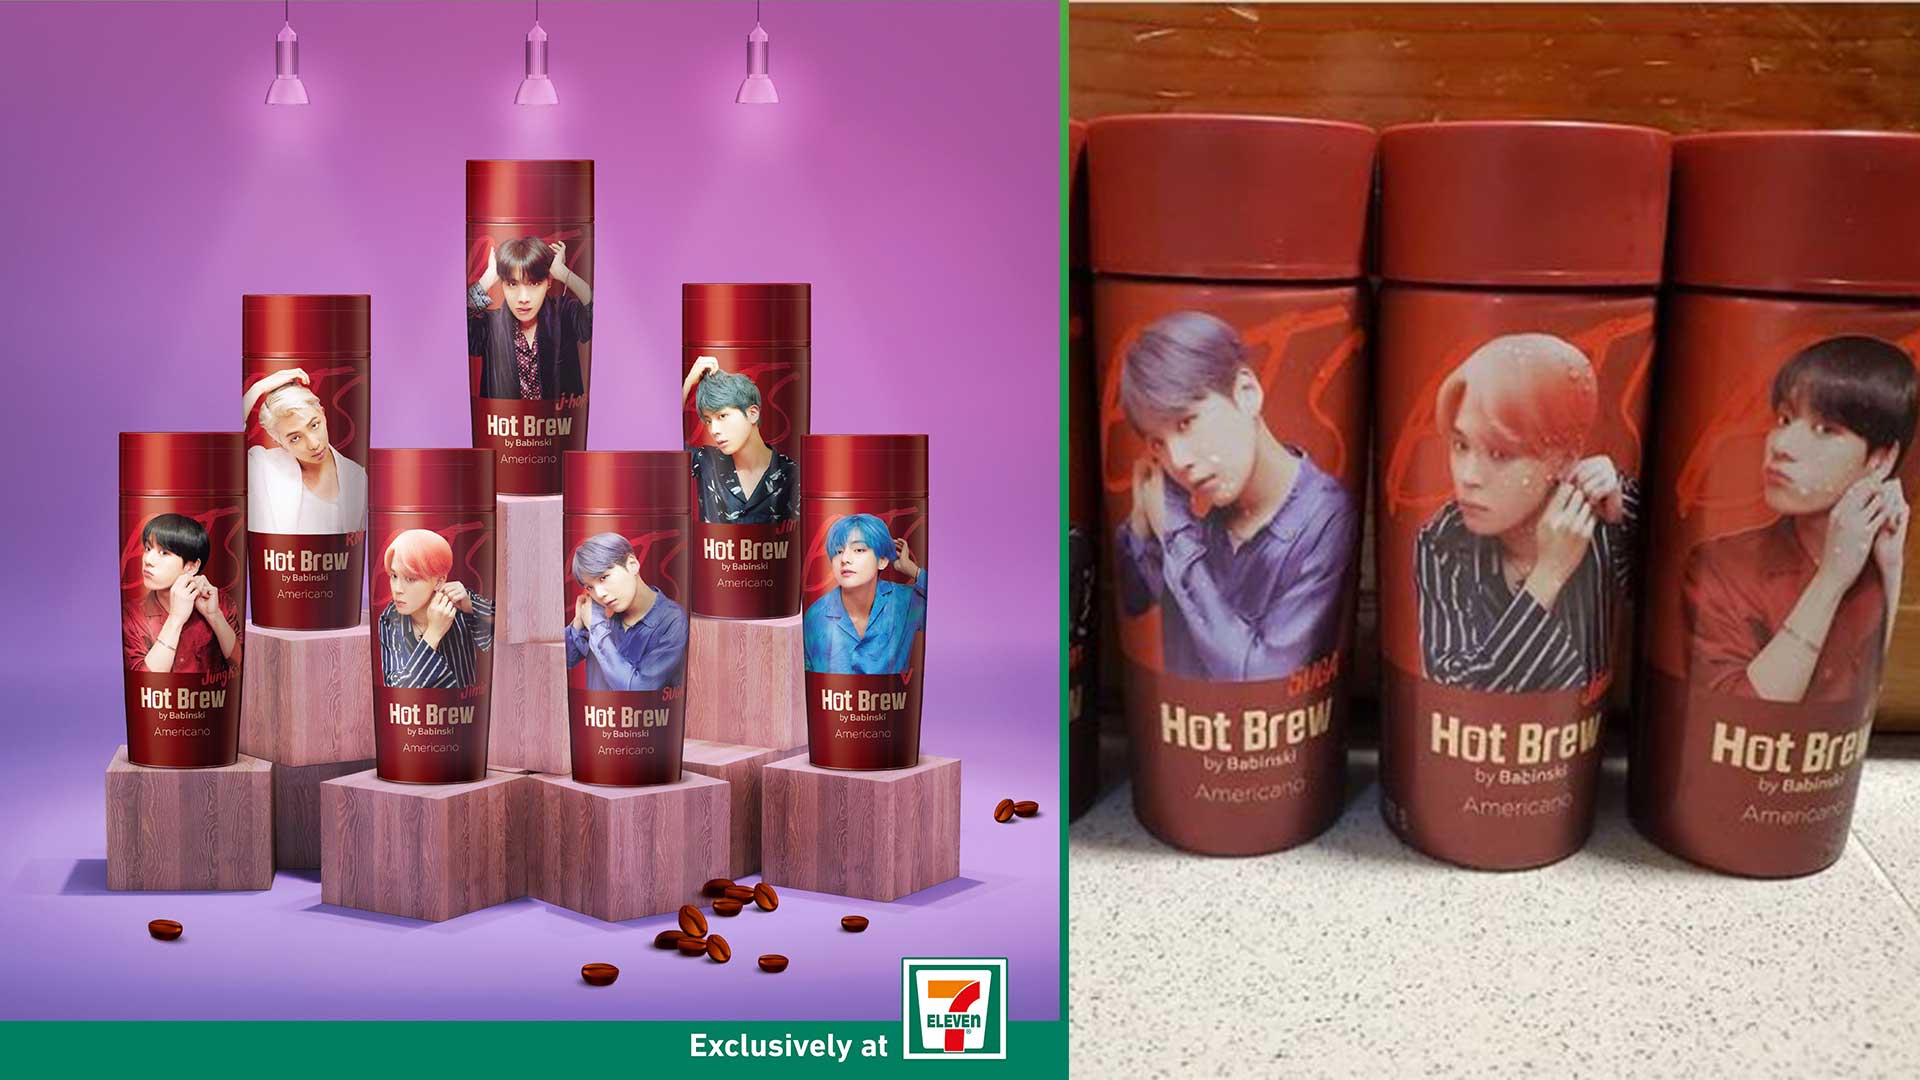 7-Eleven Singapore Now Sells BTS-Themed Hot Brew